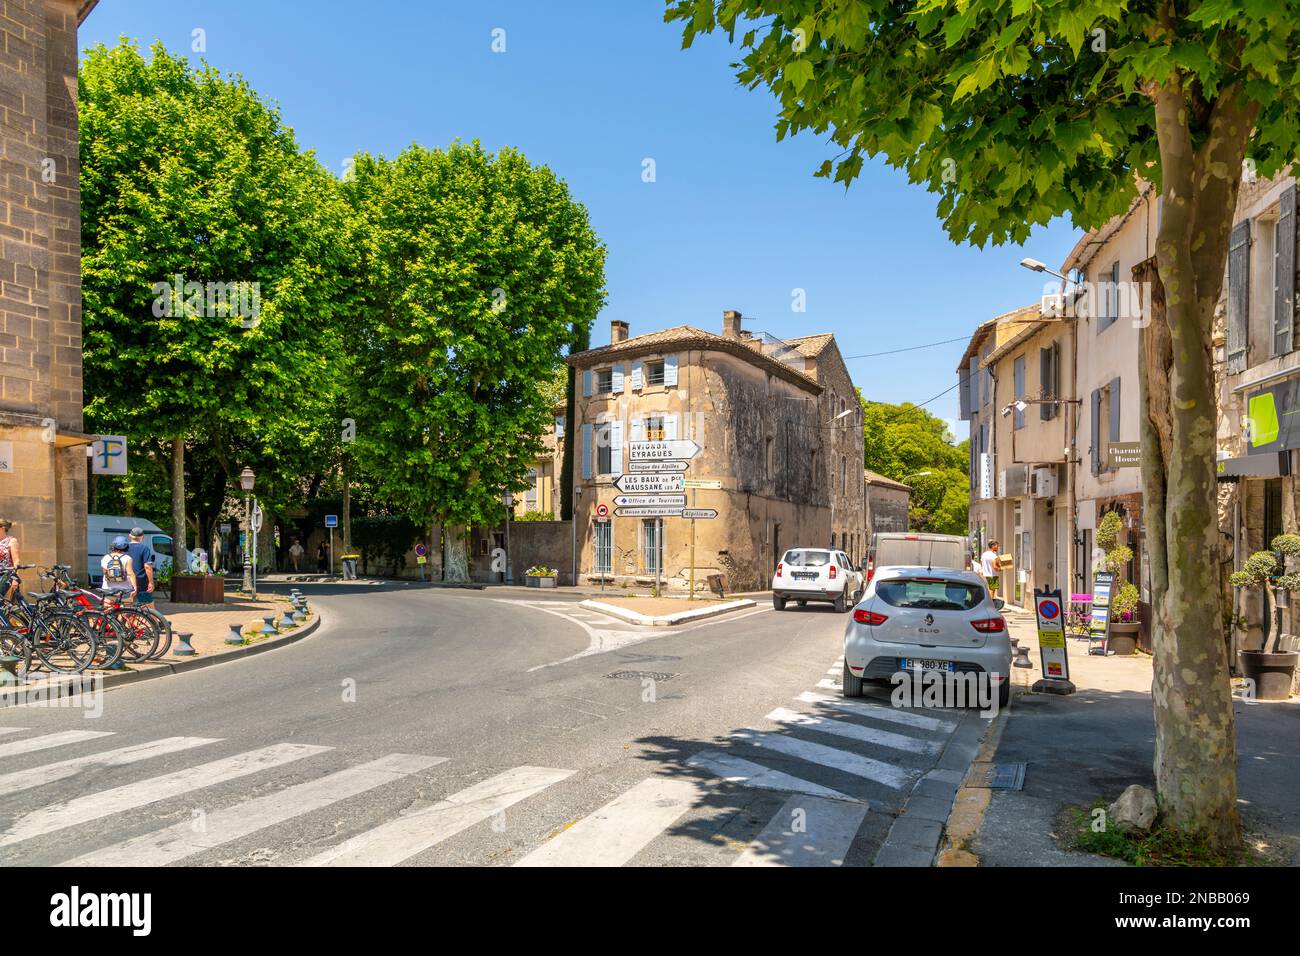 Sign posts pointing towards Avignon, the Alpilles and the tourism office at an intersection in the medieval center of Saint-Remy-de-Provence, France Stock Photo